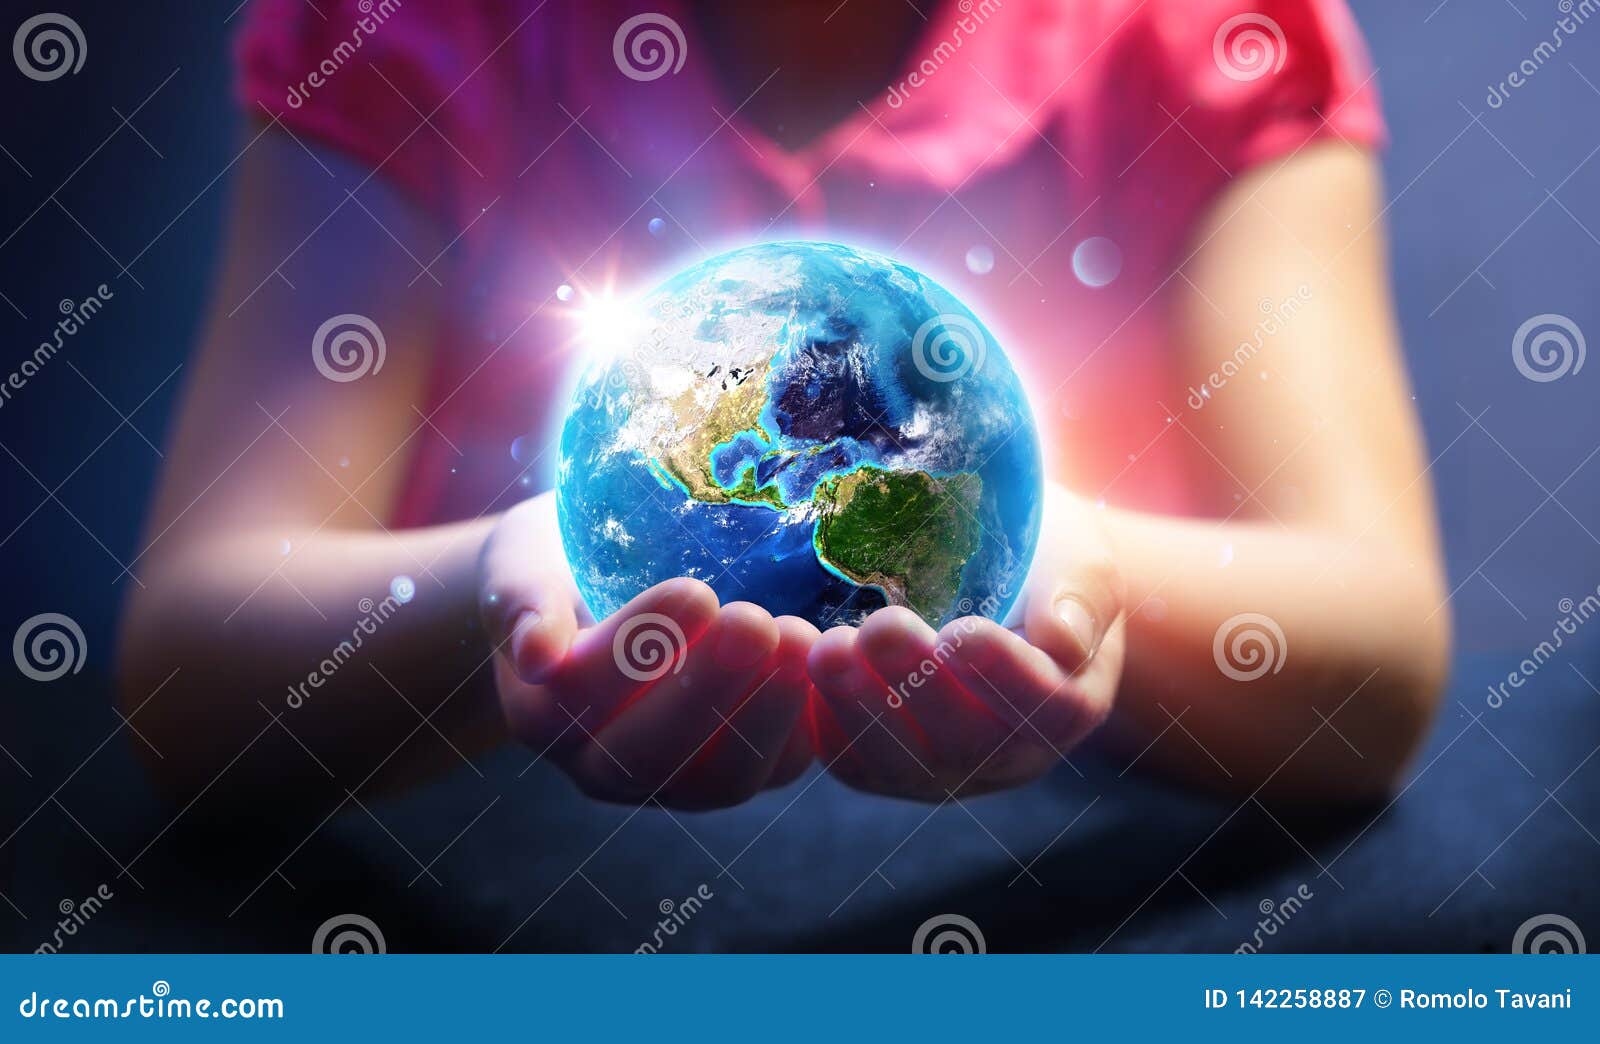 child hold world - magic of life - earth day concept -